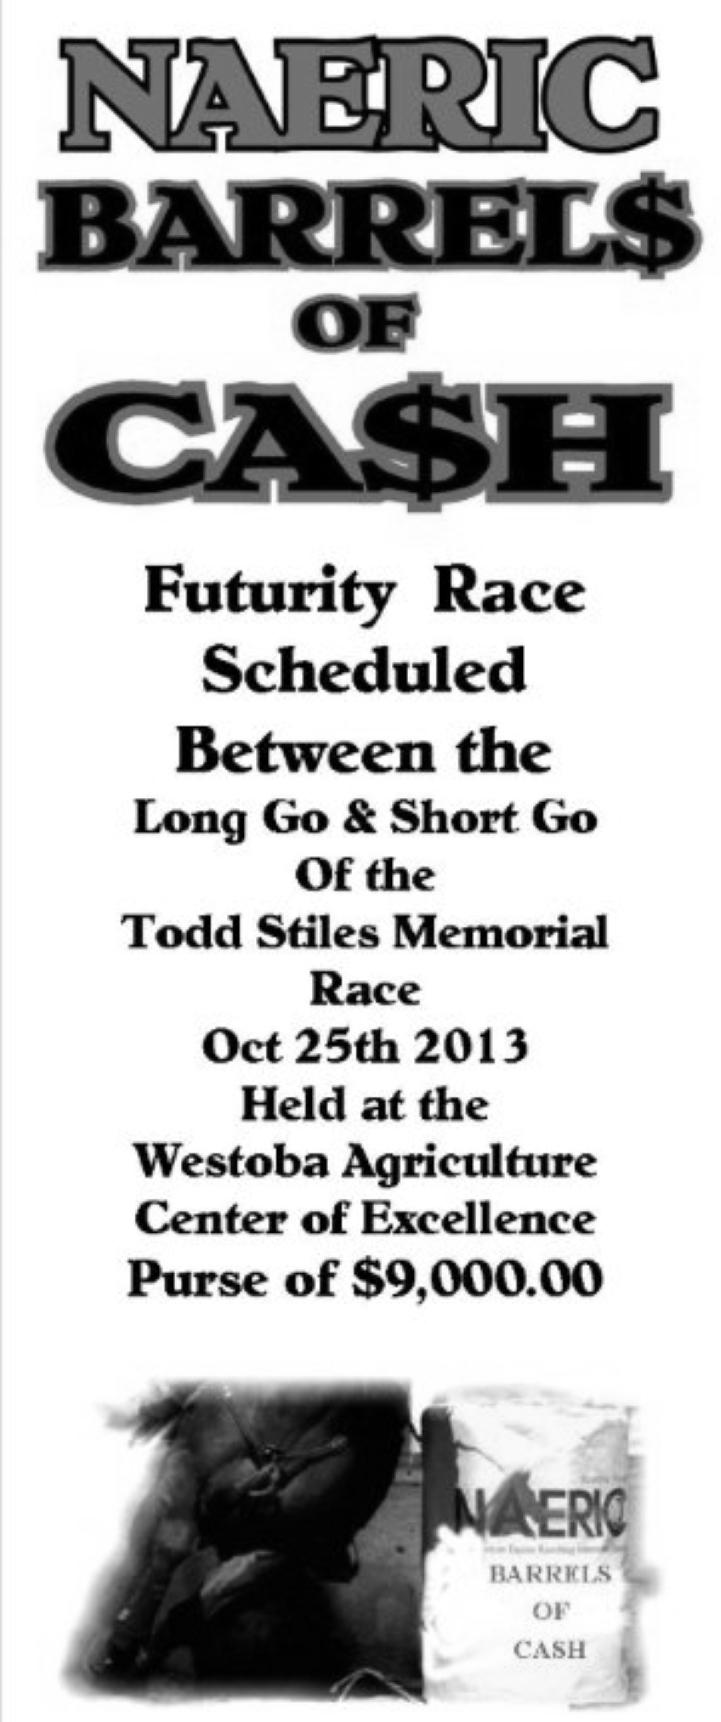 Futurity Race 1st go Thursday afternoon, Oct 22nd, 2015 2nd go